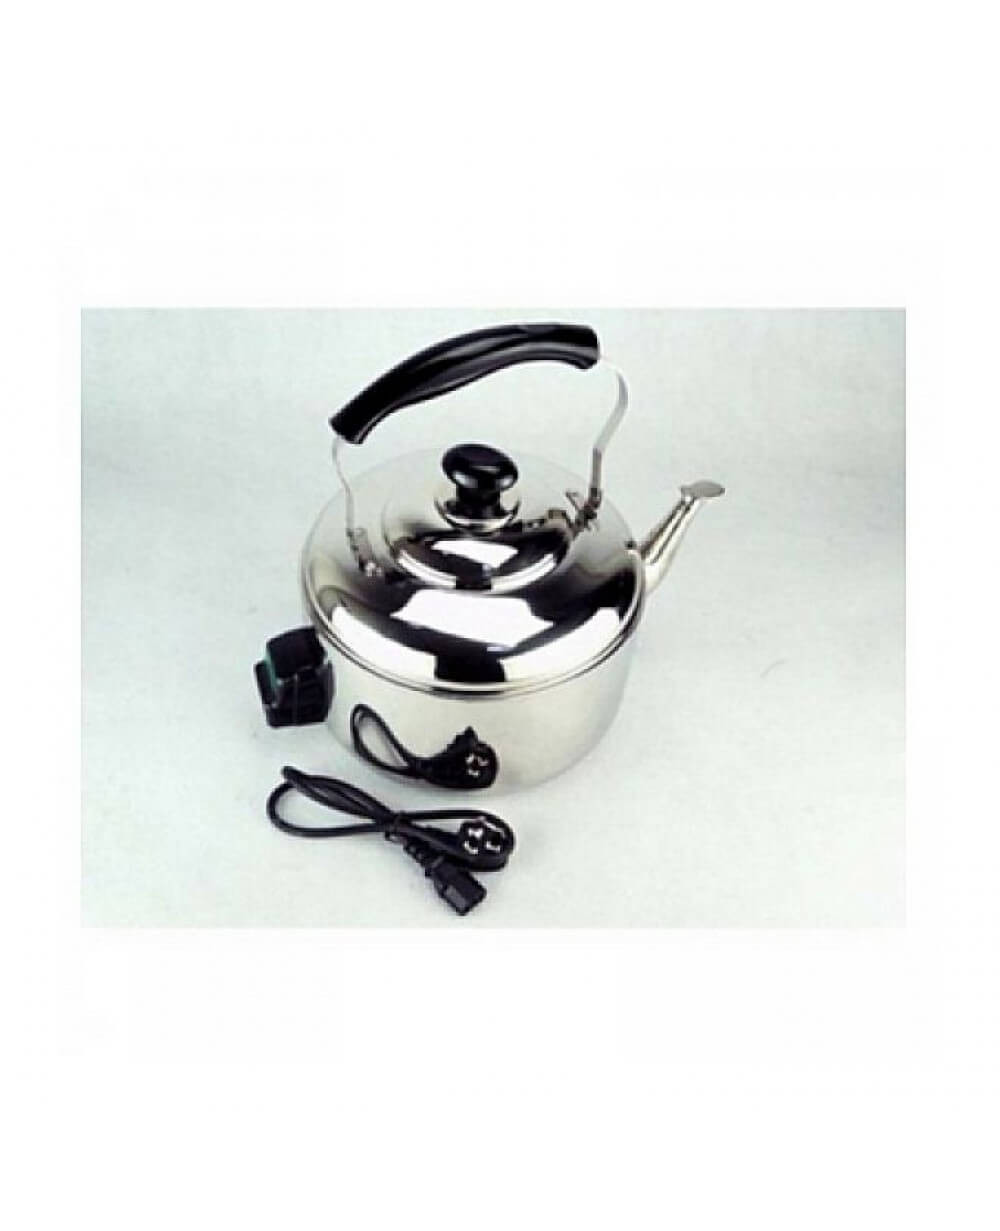 Baltra     Solid   Whistling Kettle      |  BC 125   |   4 Ltr